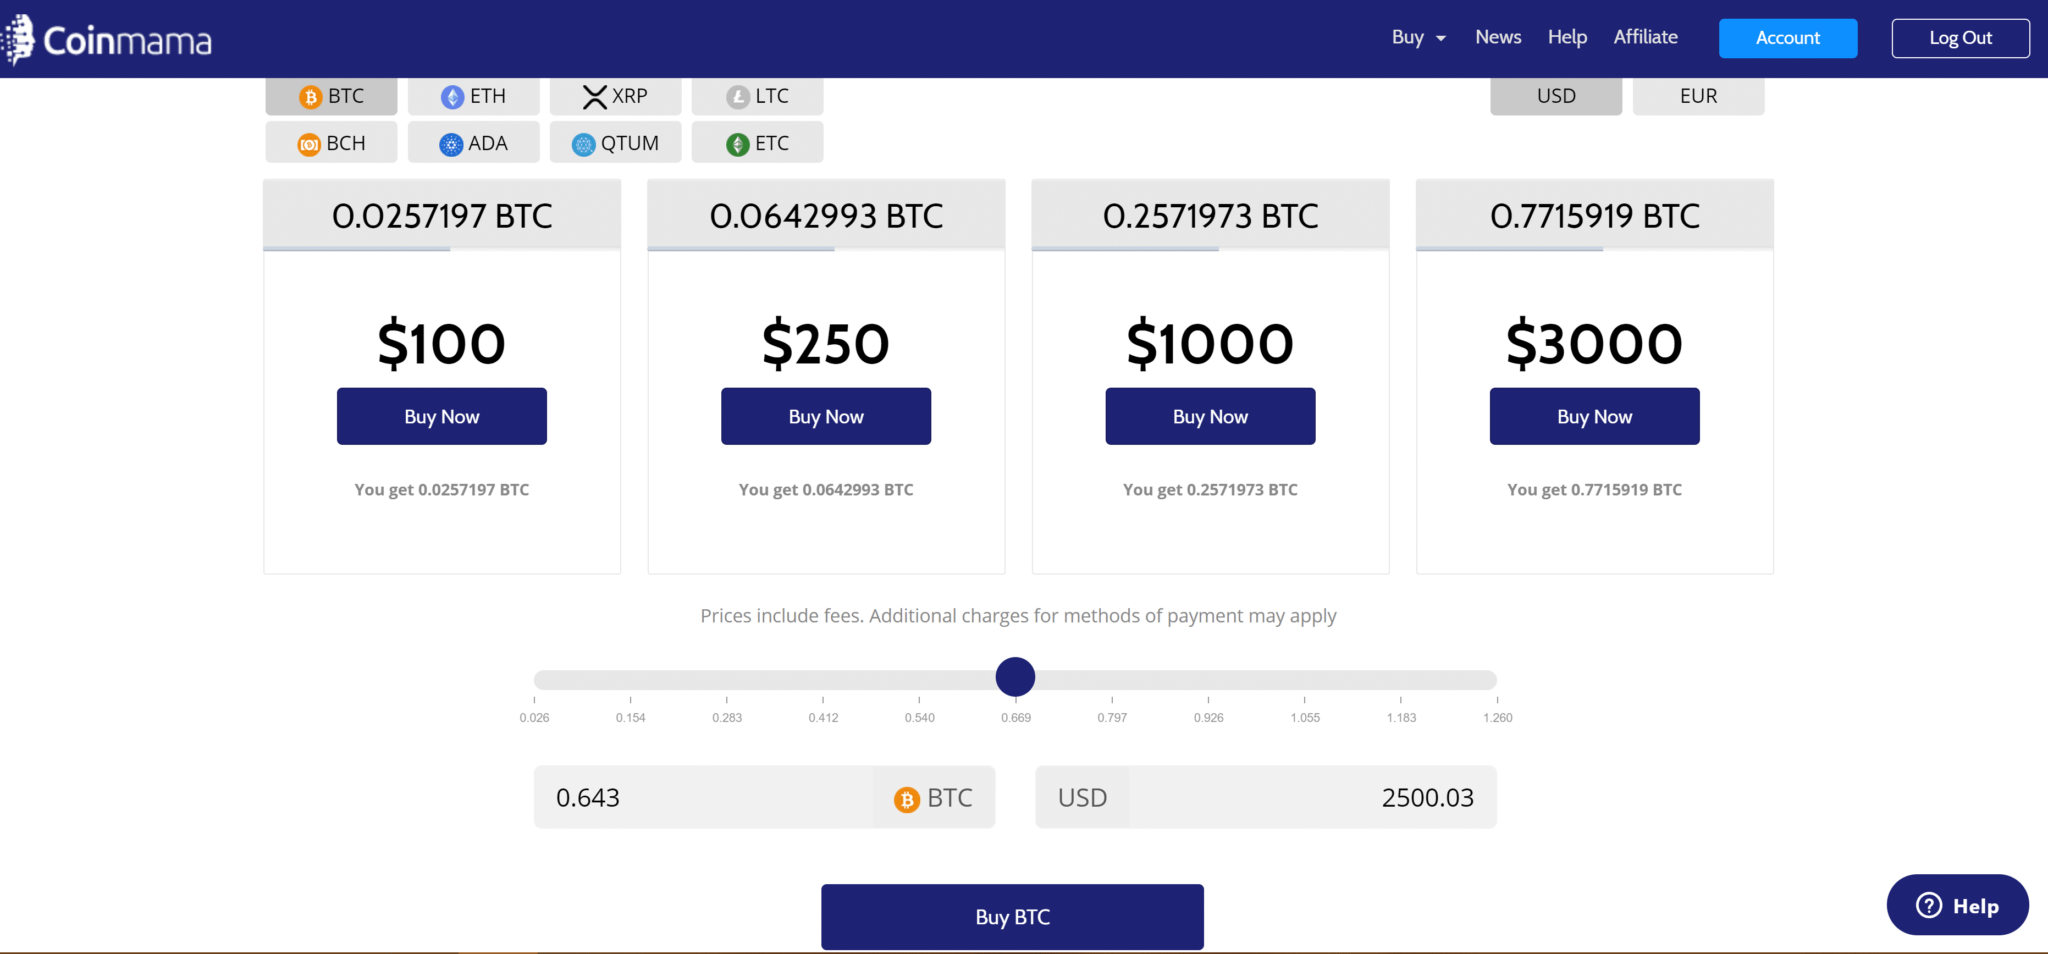 Buy crypto with credit card: Coinmama's buy options